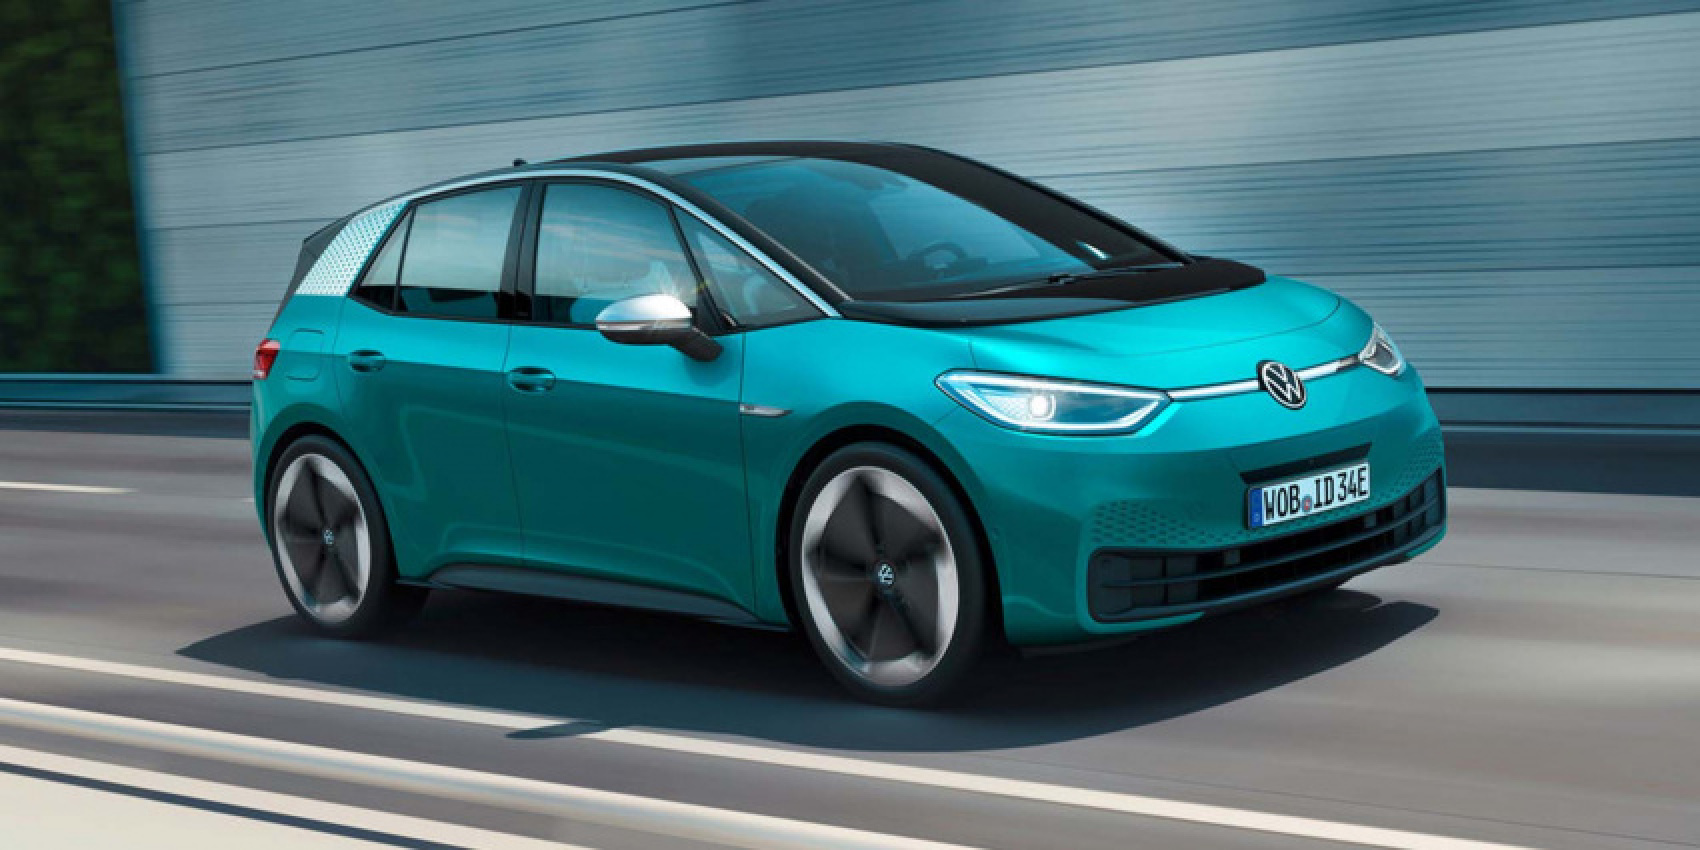 autos, cars, volkswagen, volkswagen group increases ev deliveries by 64% in 2021, beats eu co2 emissions target by 2%